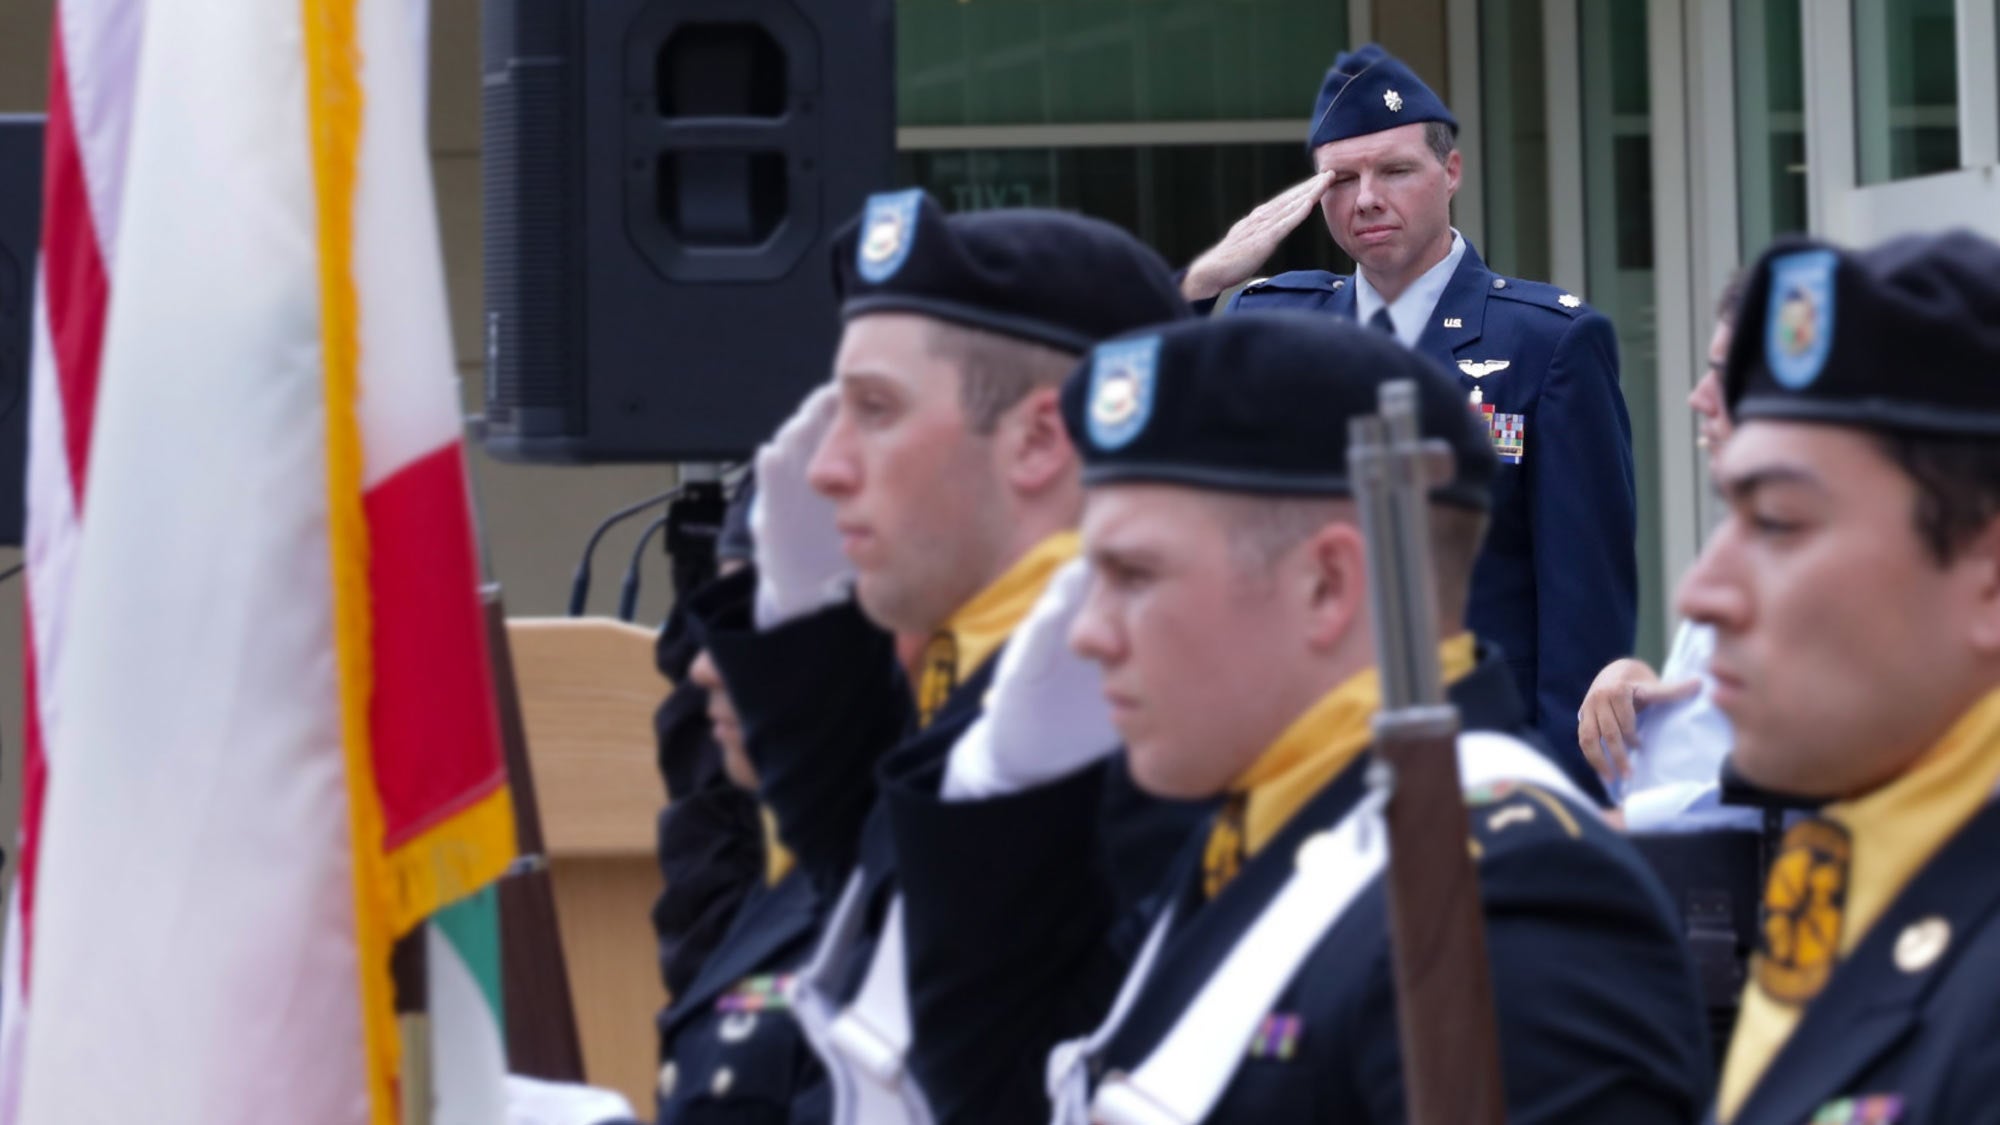 Air Force officer salutes, in background, behind color guard